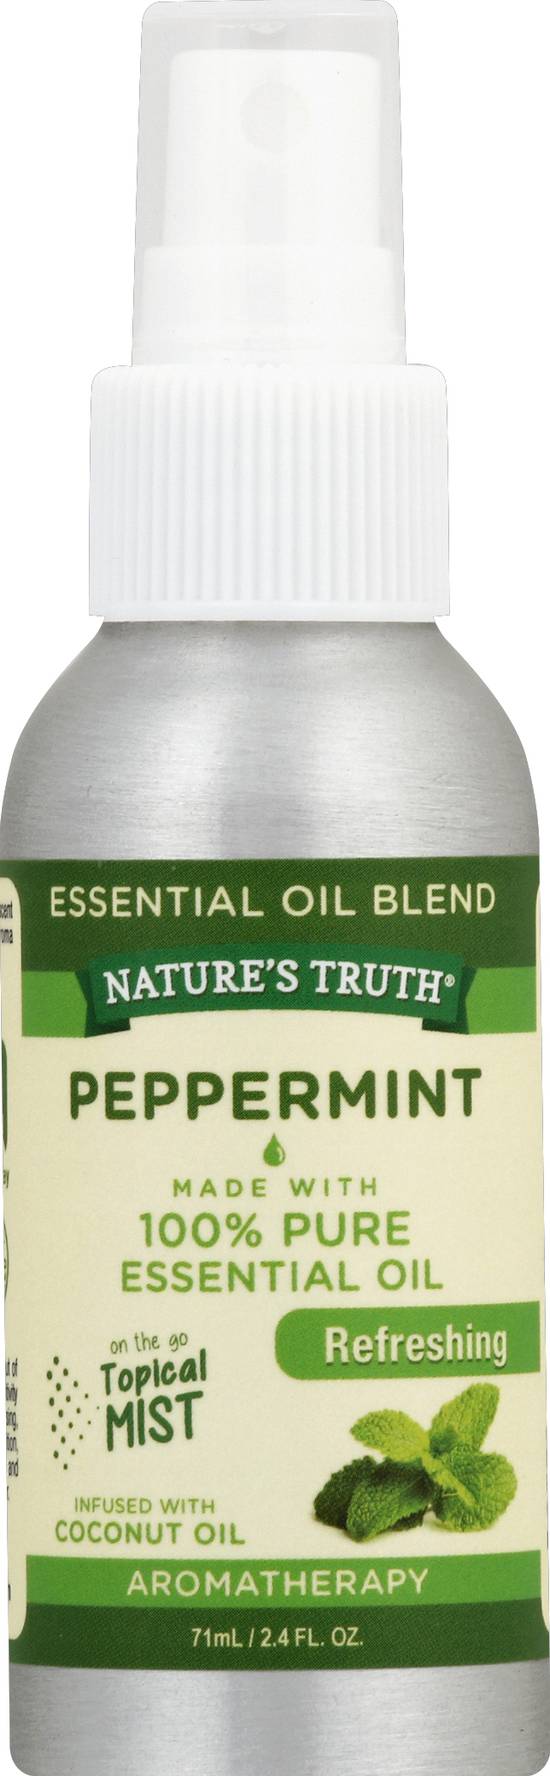 Nature's Truth Peppermint Pure Essential Oil Blend Refreshing (2.4 fl oz)